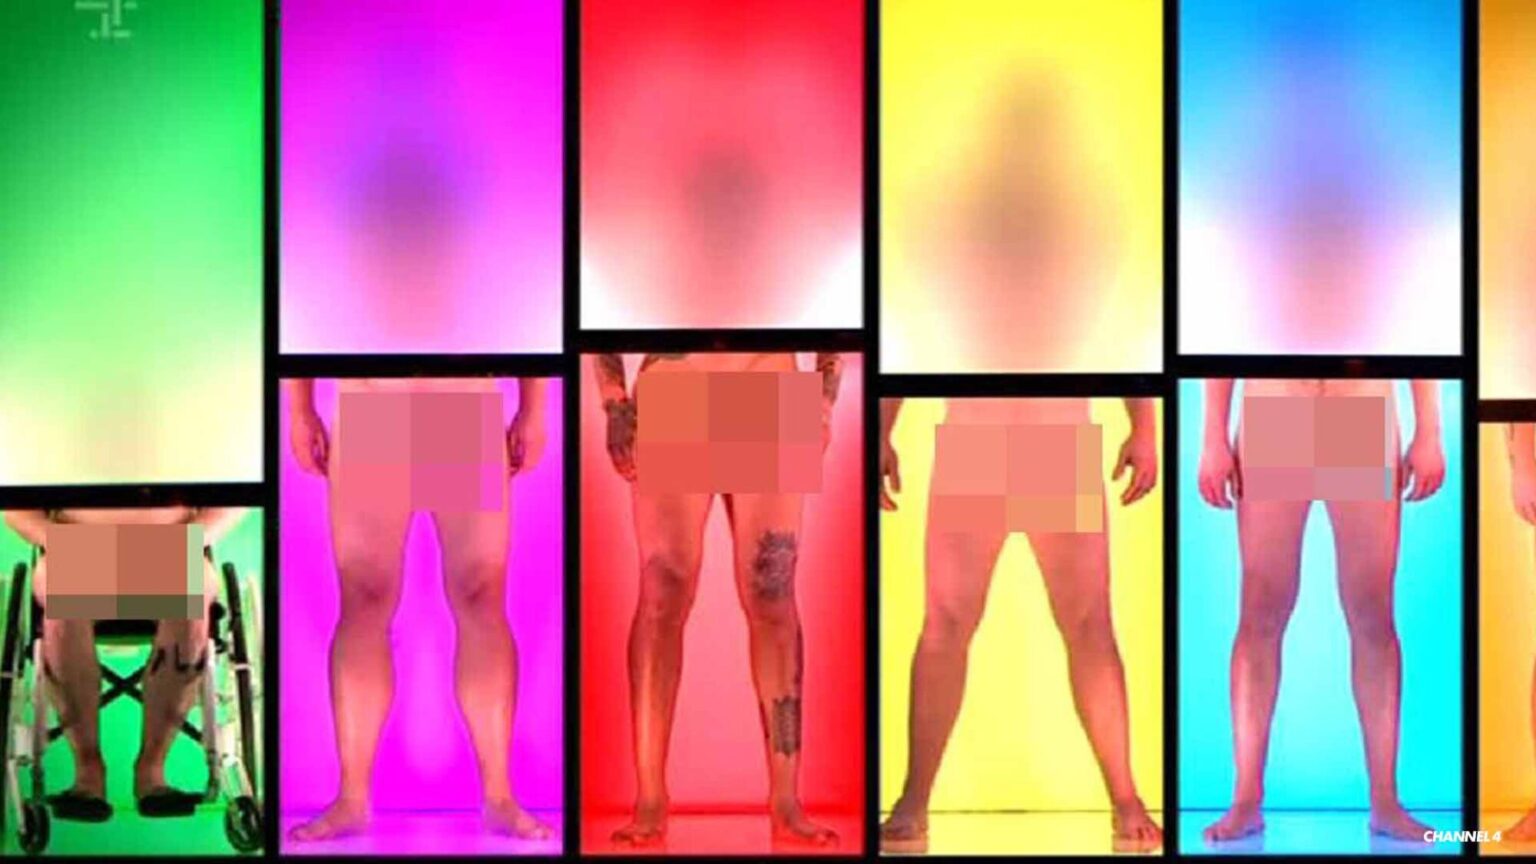 The already controversial show 'Naked Attraction' aired an especially explicit episode on Channel 4 recently, and folks are upset. Read about it here.